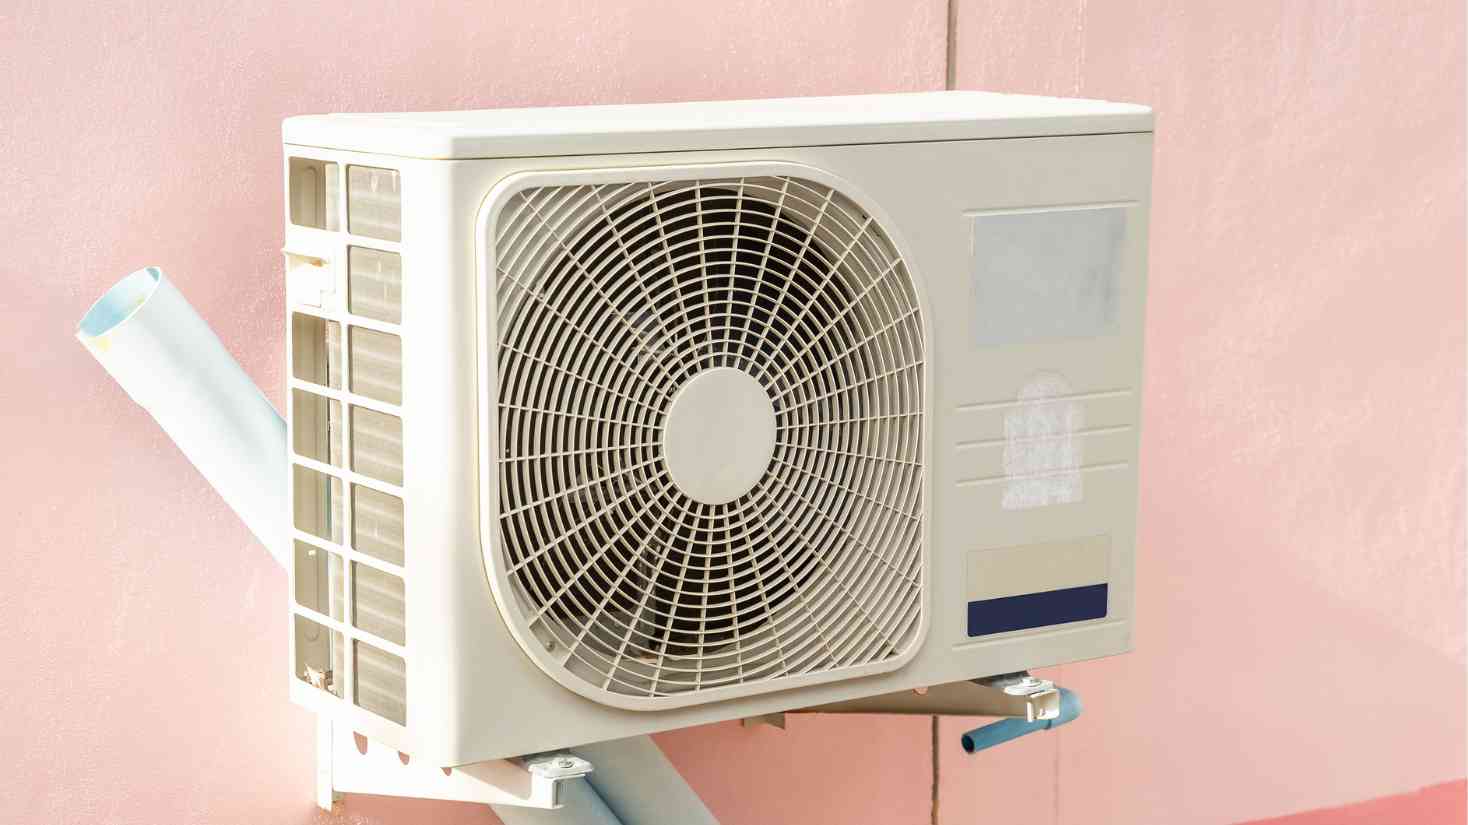 Does Home Insurance Cover Air Conditioning Units?